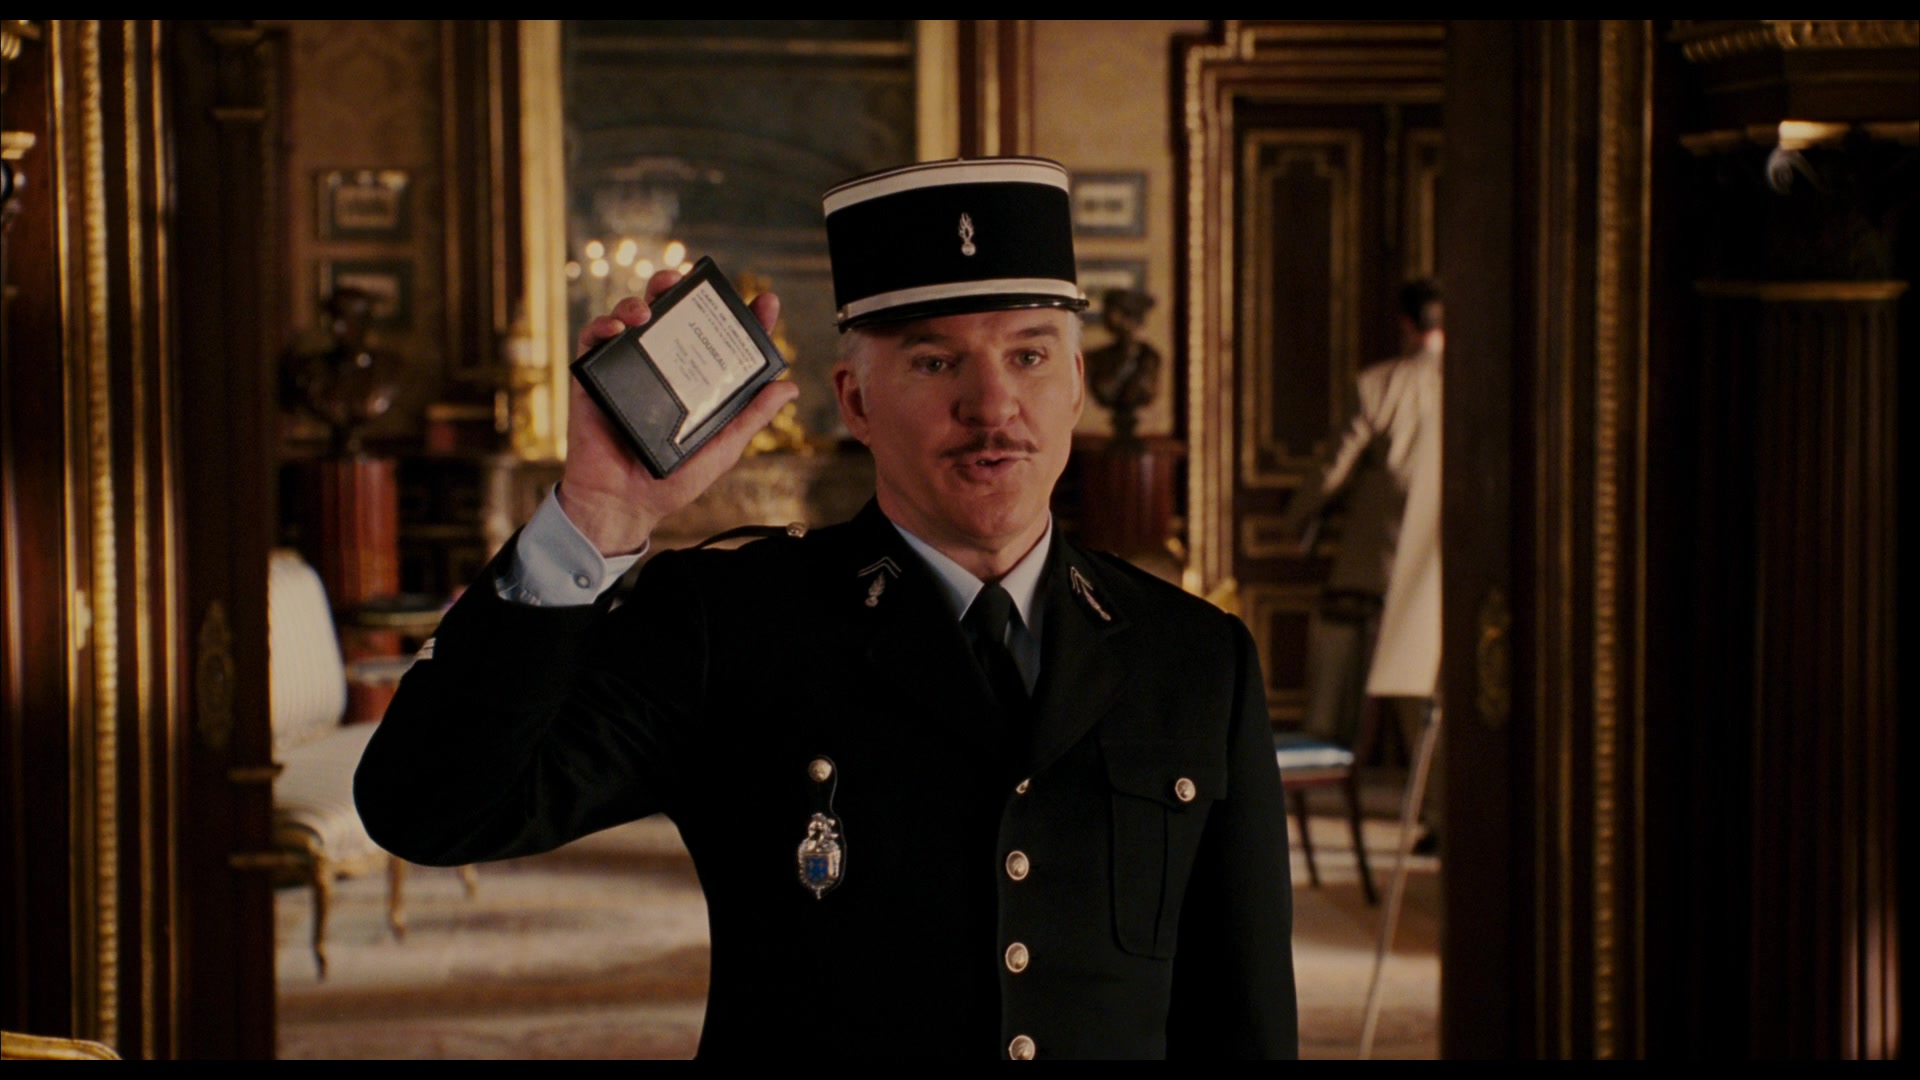 Inspector Clouseau (Steve Martin) shows his credentials in The Pink Panther (2006), MGM